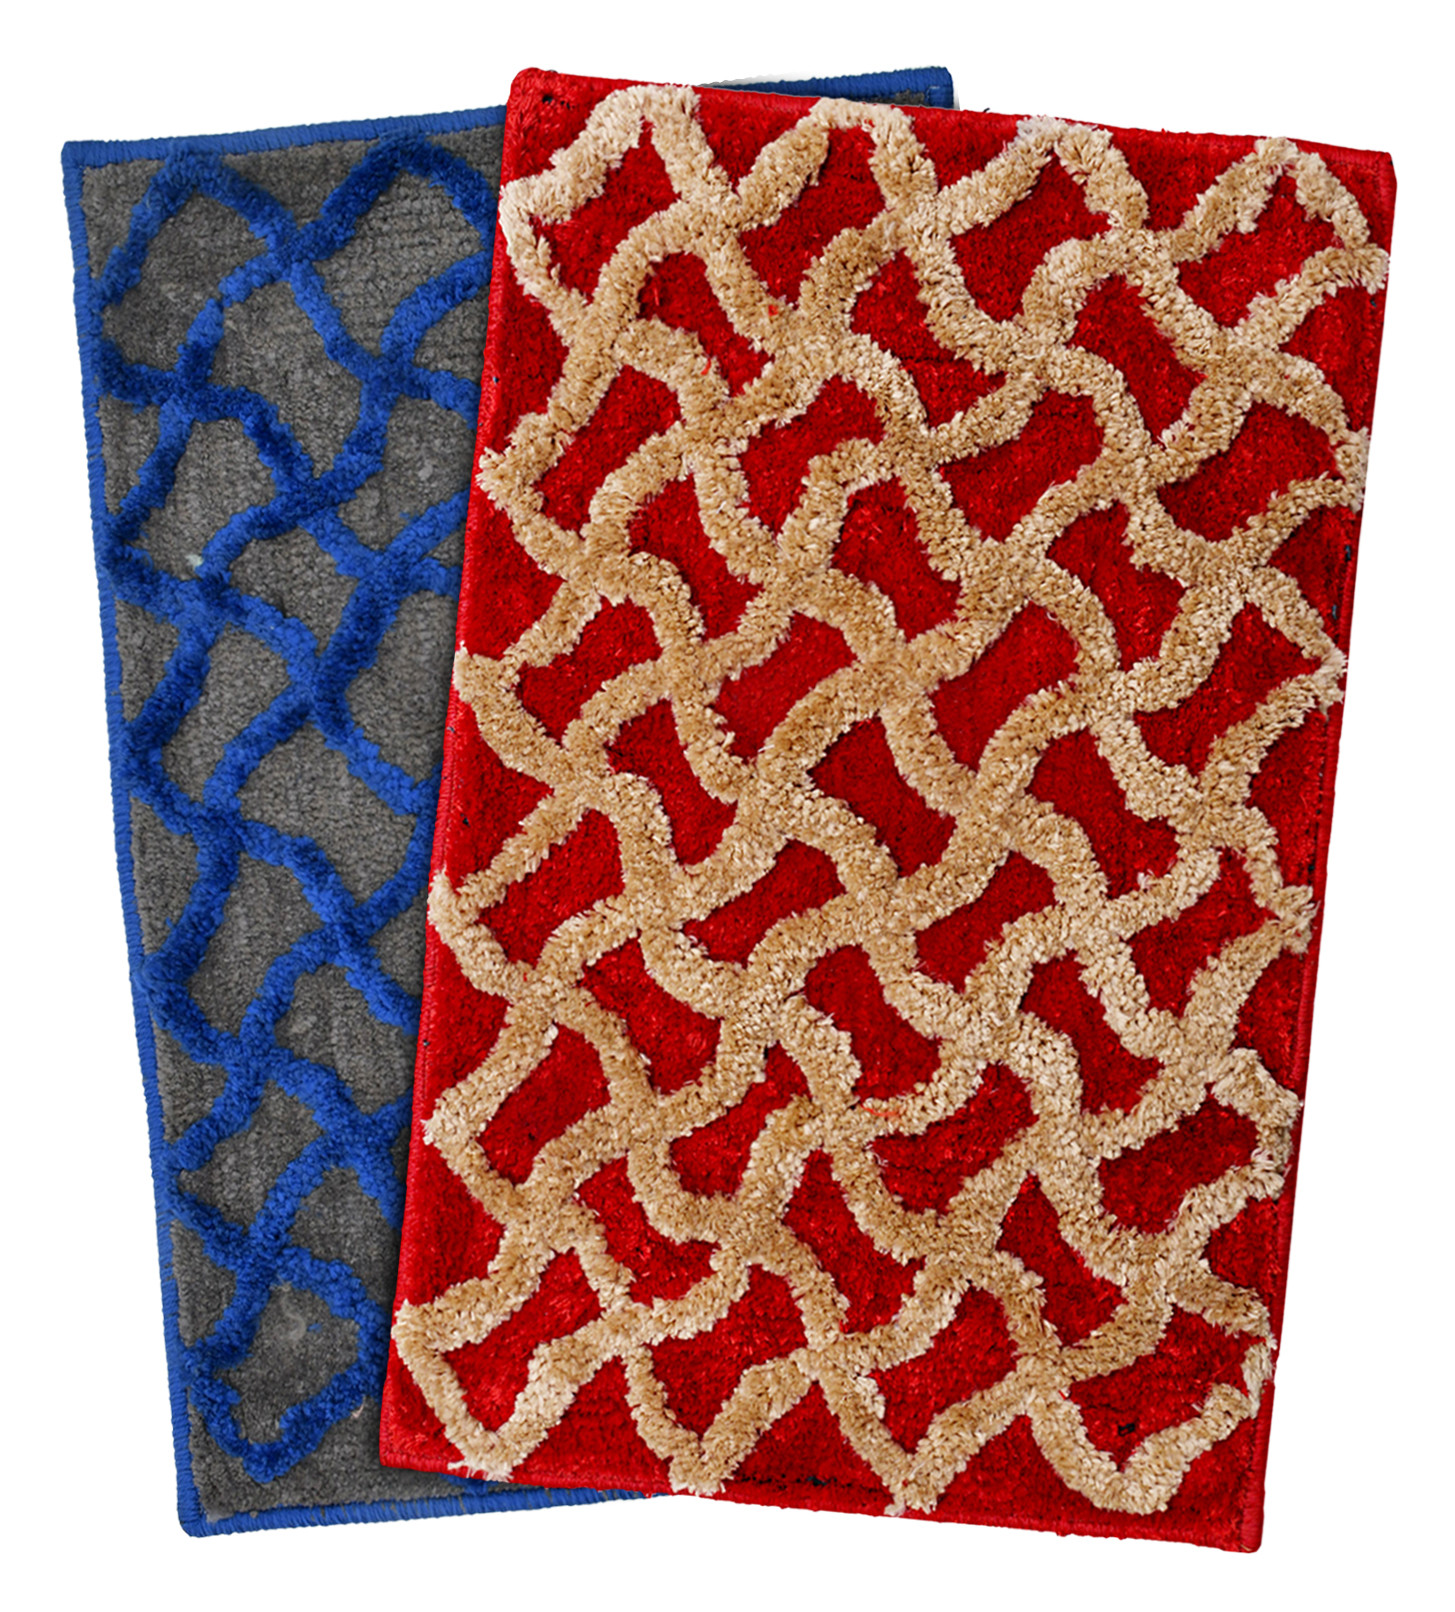 Kuber Industries Soft, lightweigth, Washable, Non Slip Doormat Entrance Rug Dirt Trapper Mat Shoes Scraper for Entry, Patio, Porch- Pack of 2 (Red & Blue)